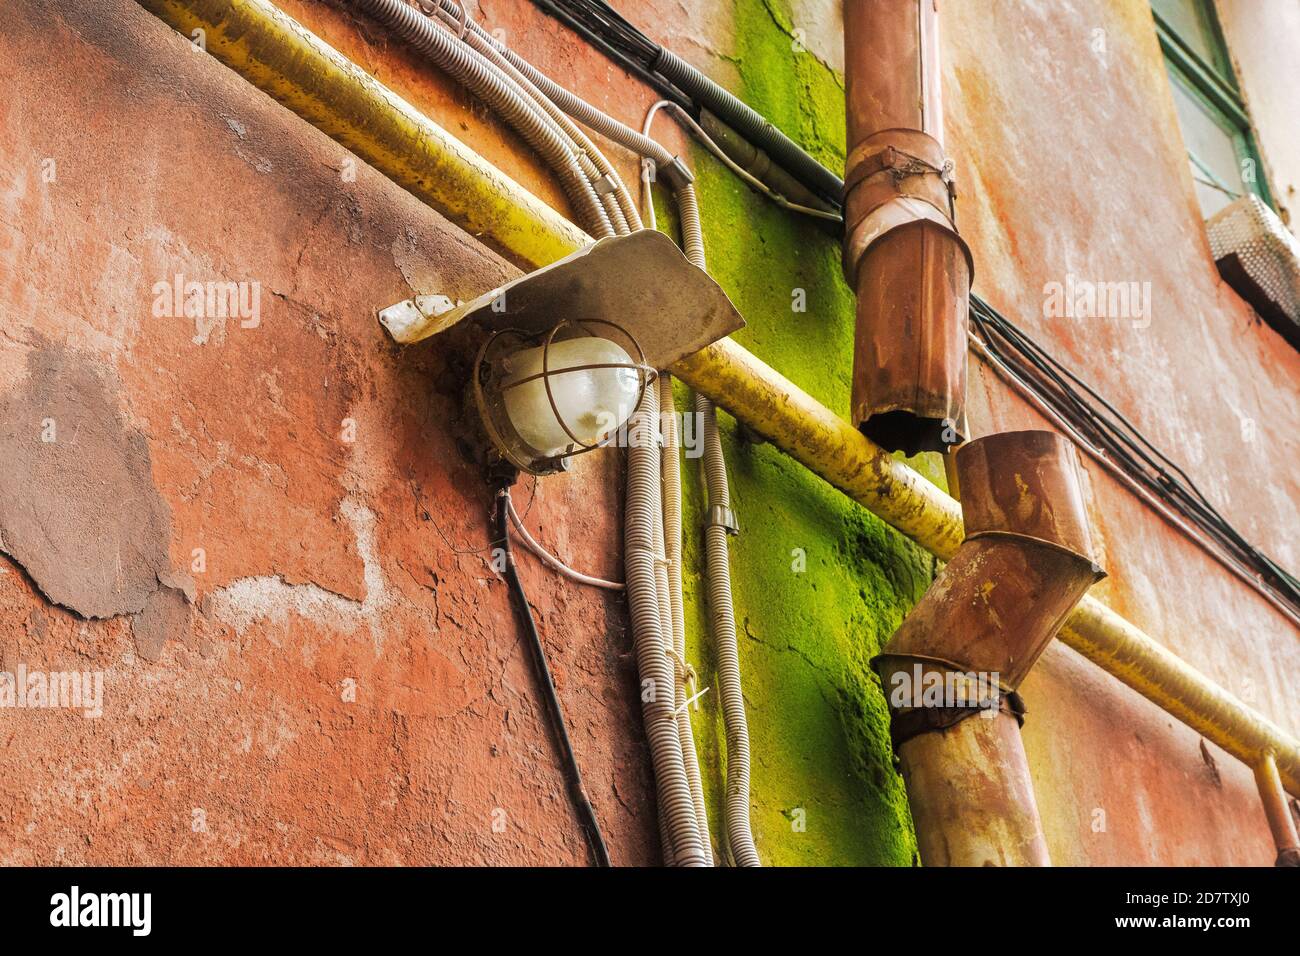 image of a lantern and a rusty drainpipe on the wall of a house Stock Photo